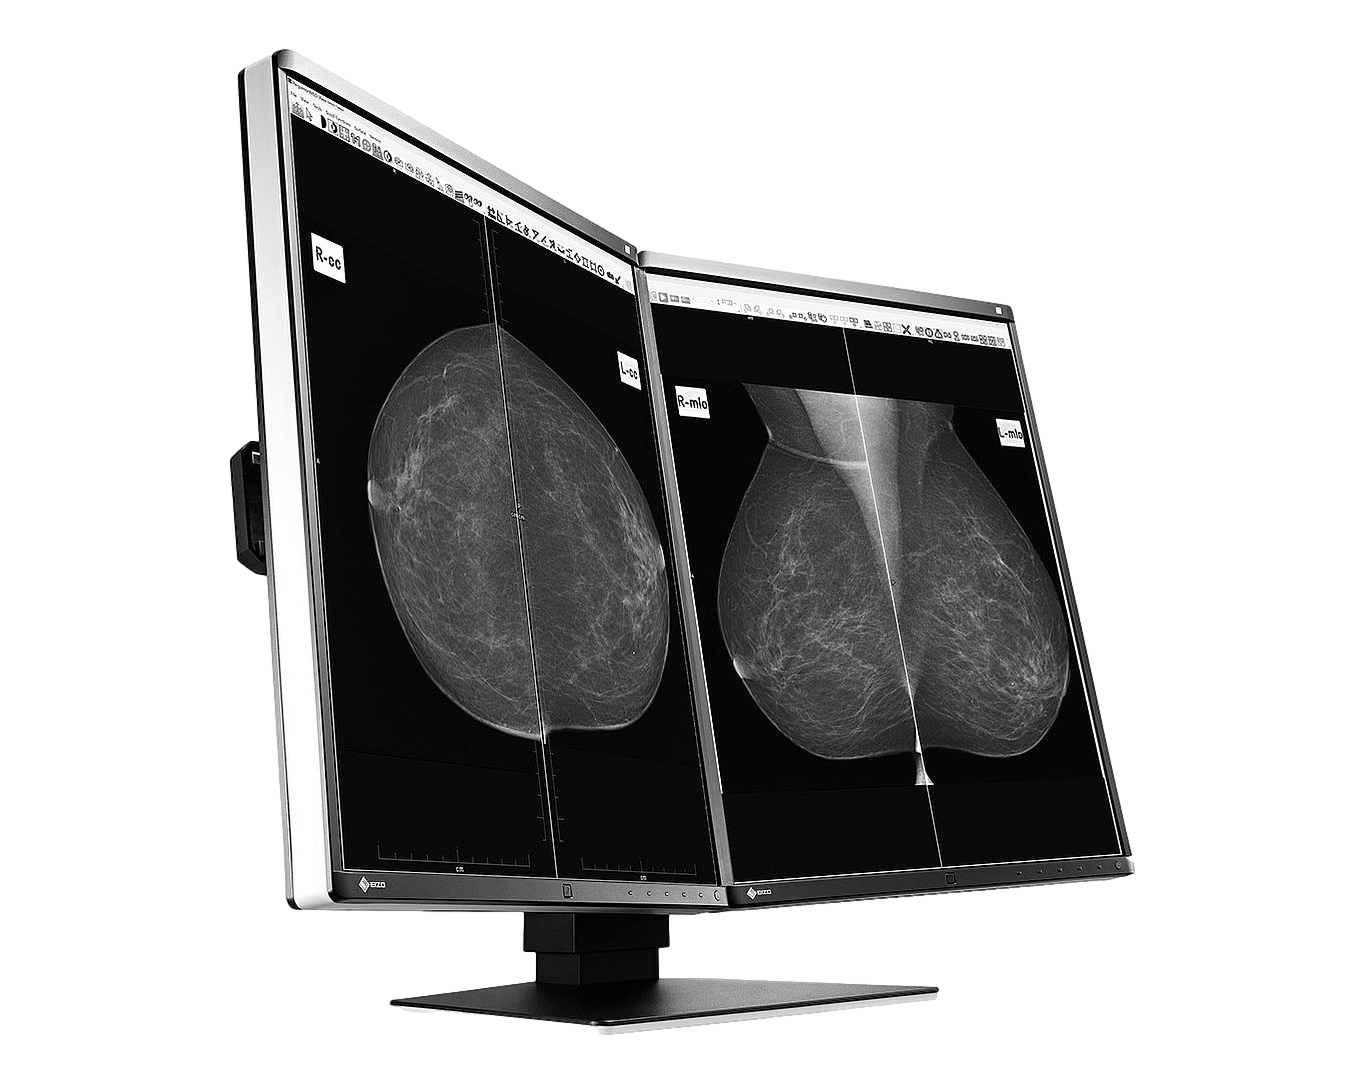 Medical monitor EIZO RadiForce GX560 5MP 21.3" LCD LED Monochrome Display is available in a dual version called MammoDuo, featuring two GX560 monitors side-by-side with a thin bezel